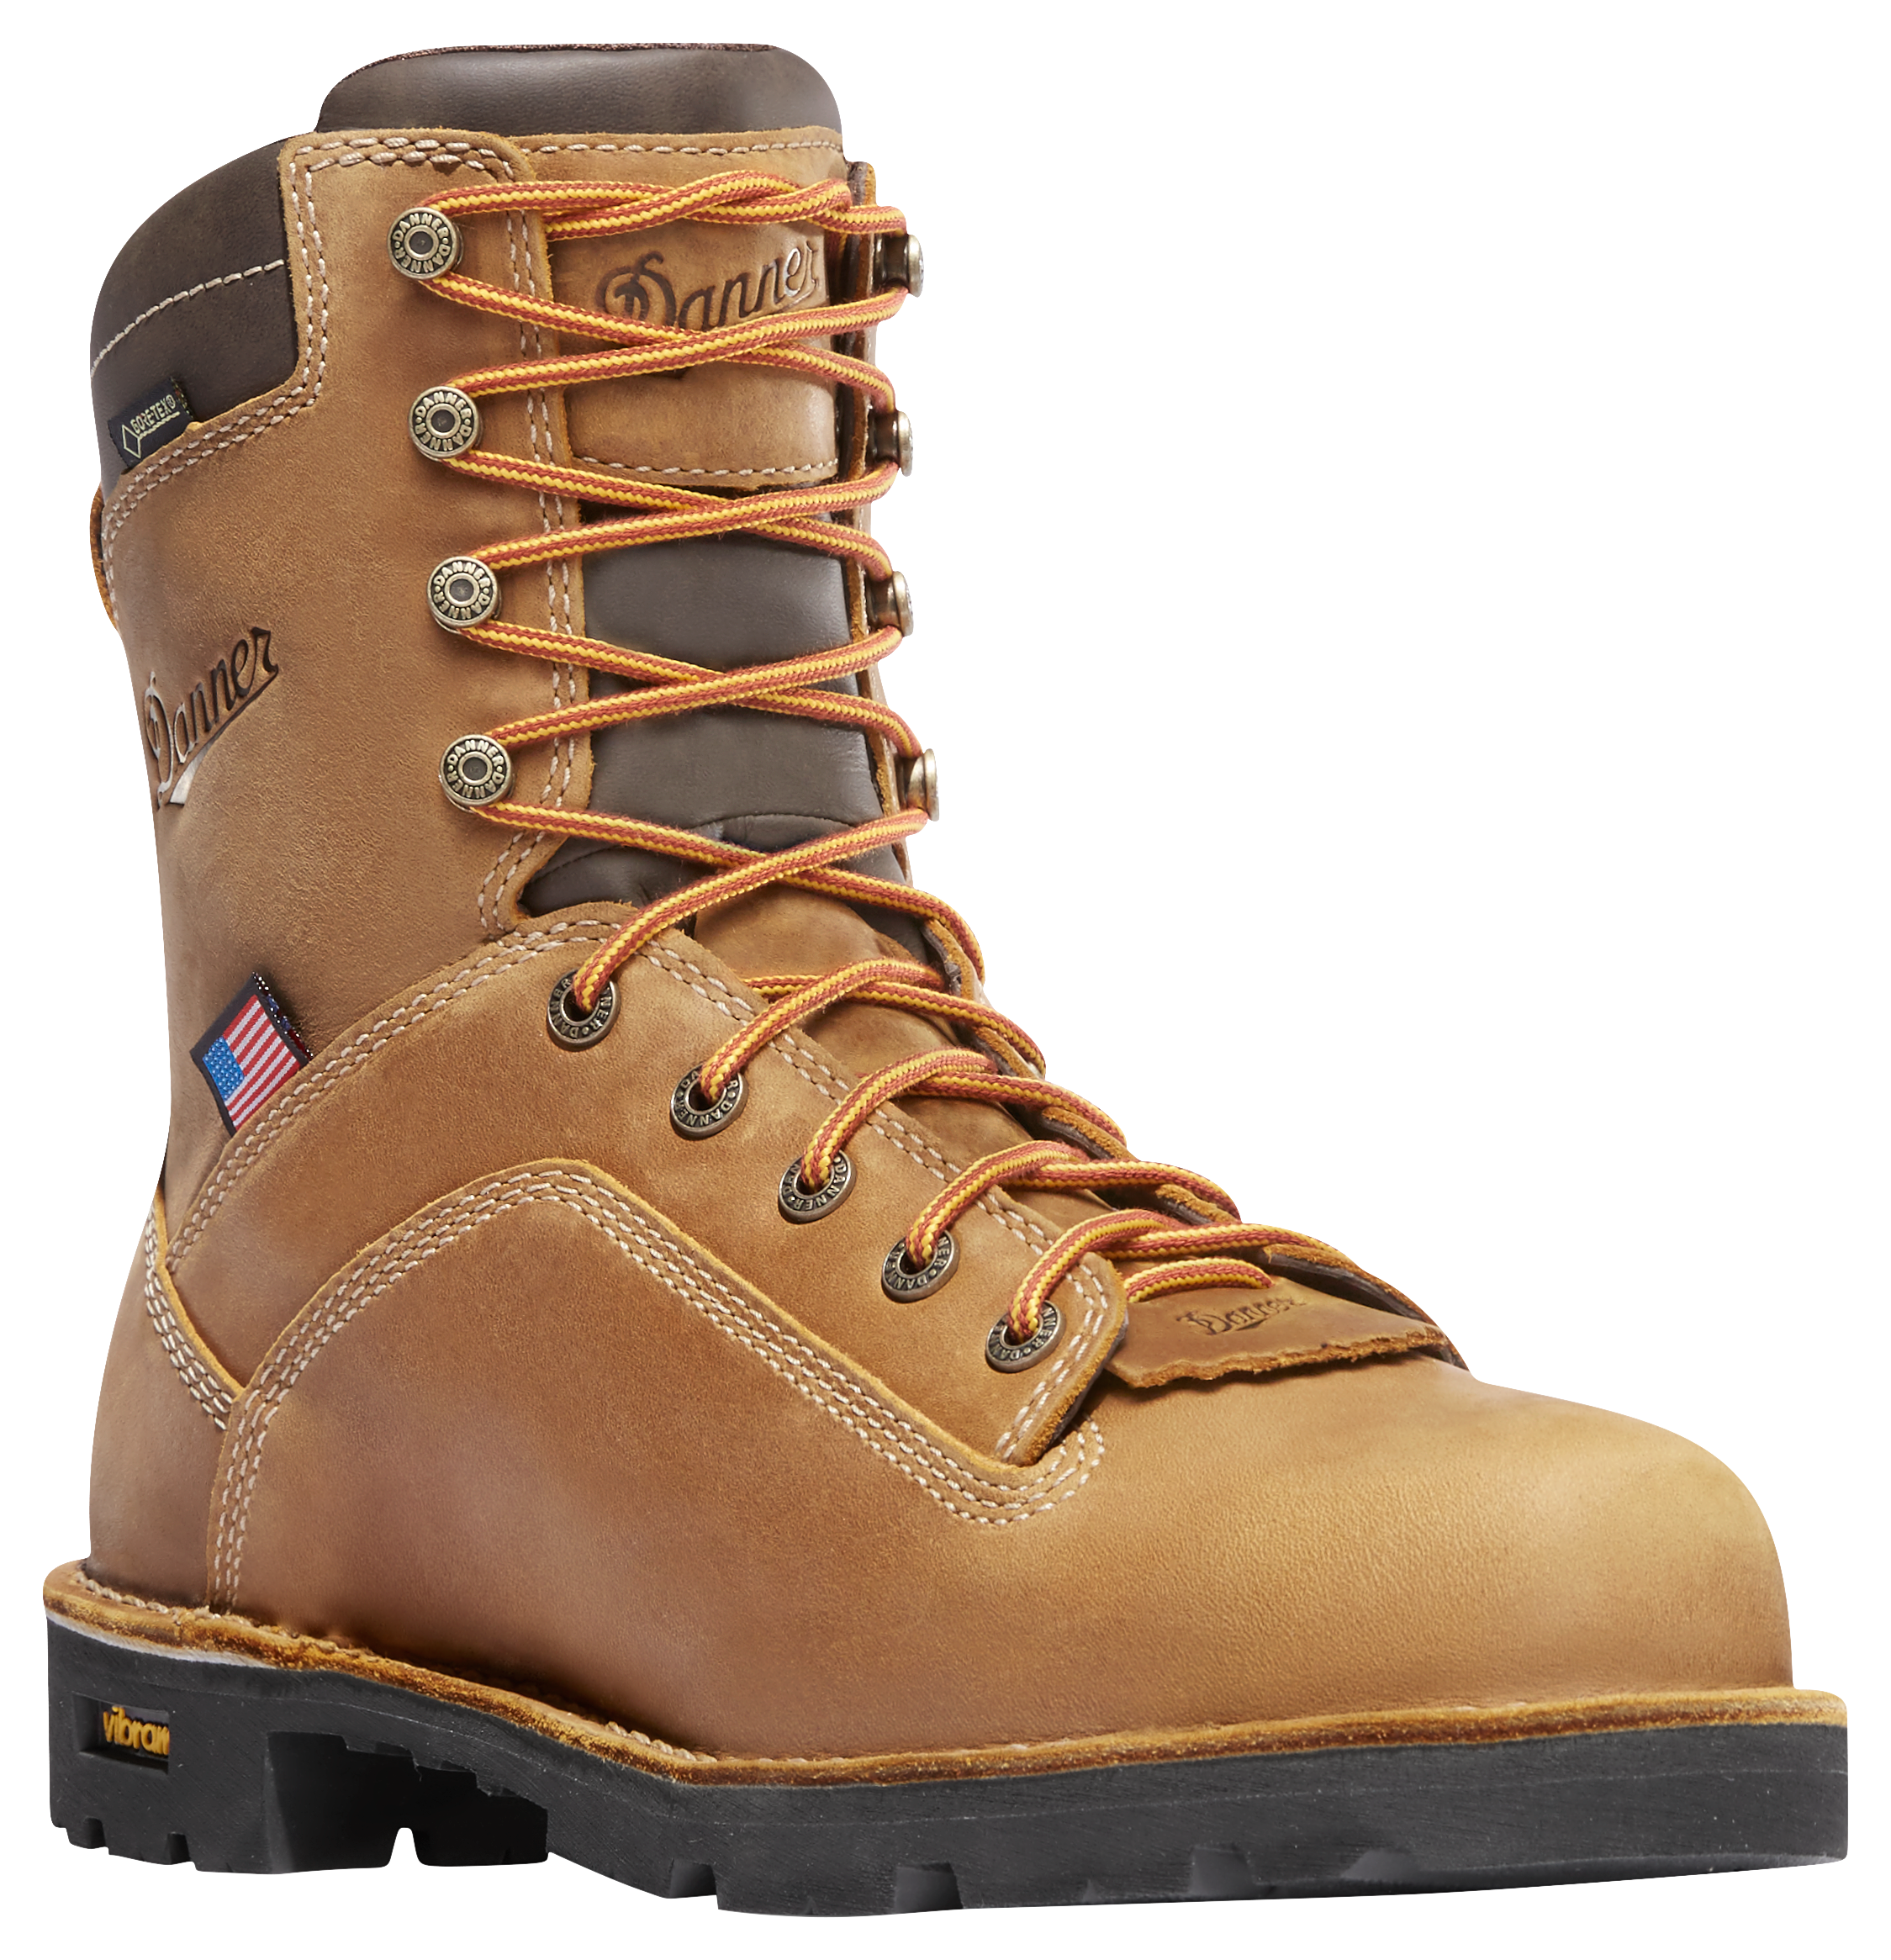 Danner Quarry USA GORE-TEX Insulated Work Boots for Men - Distress Brown - 8M